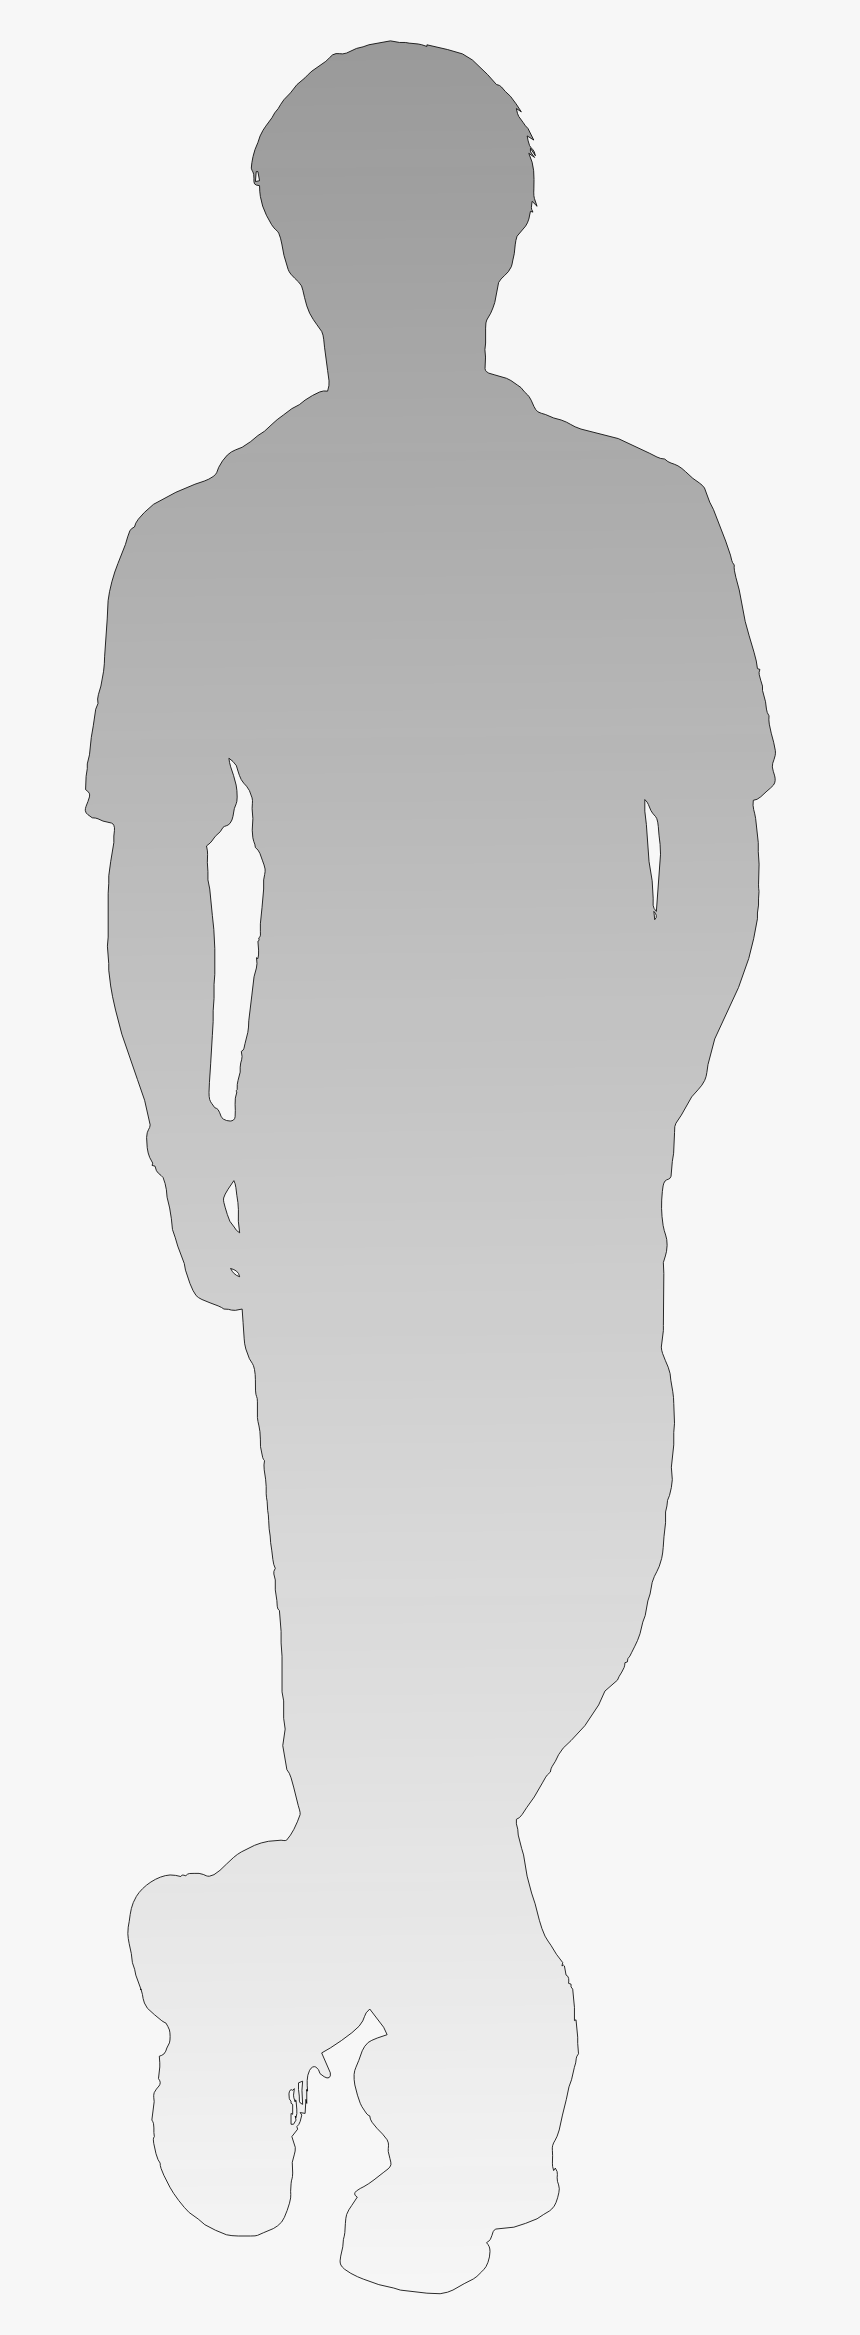 Shadow Of Person - Man White Shadow Png, Transparent Png, Free Download